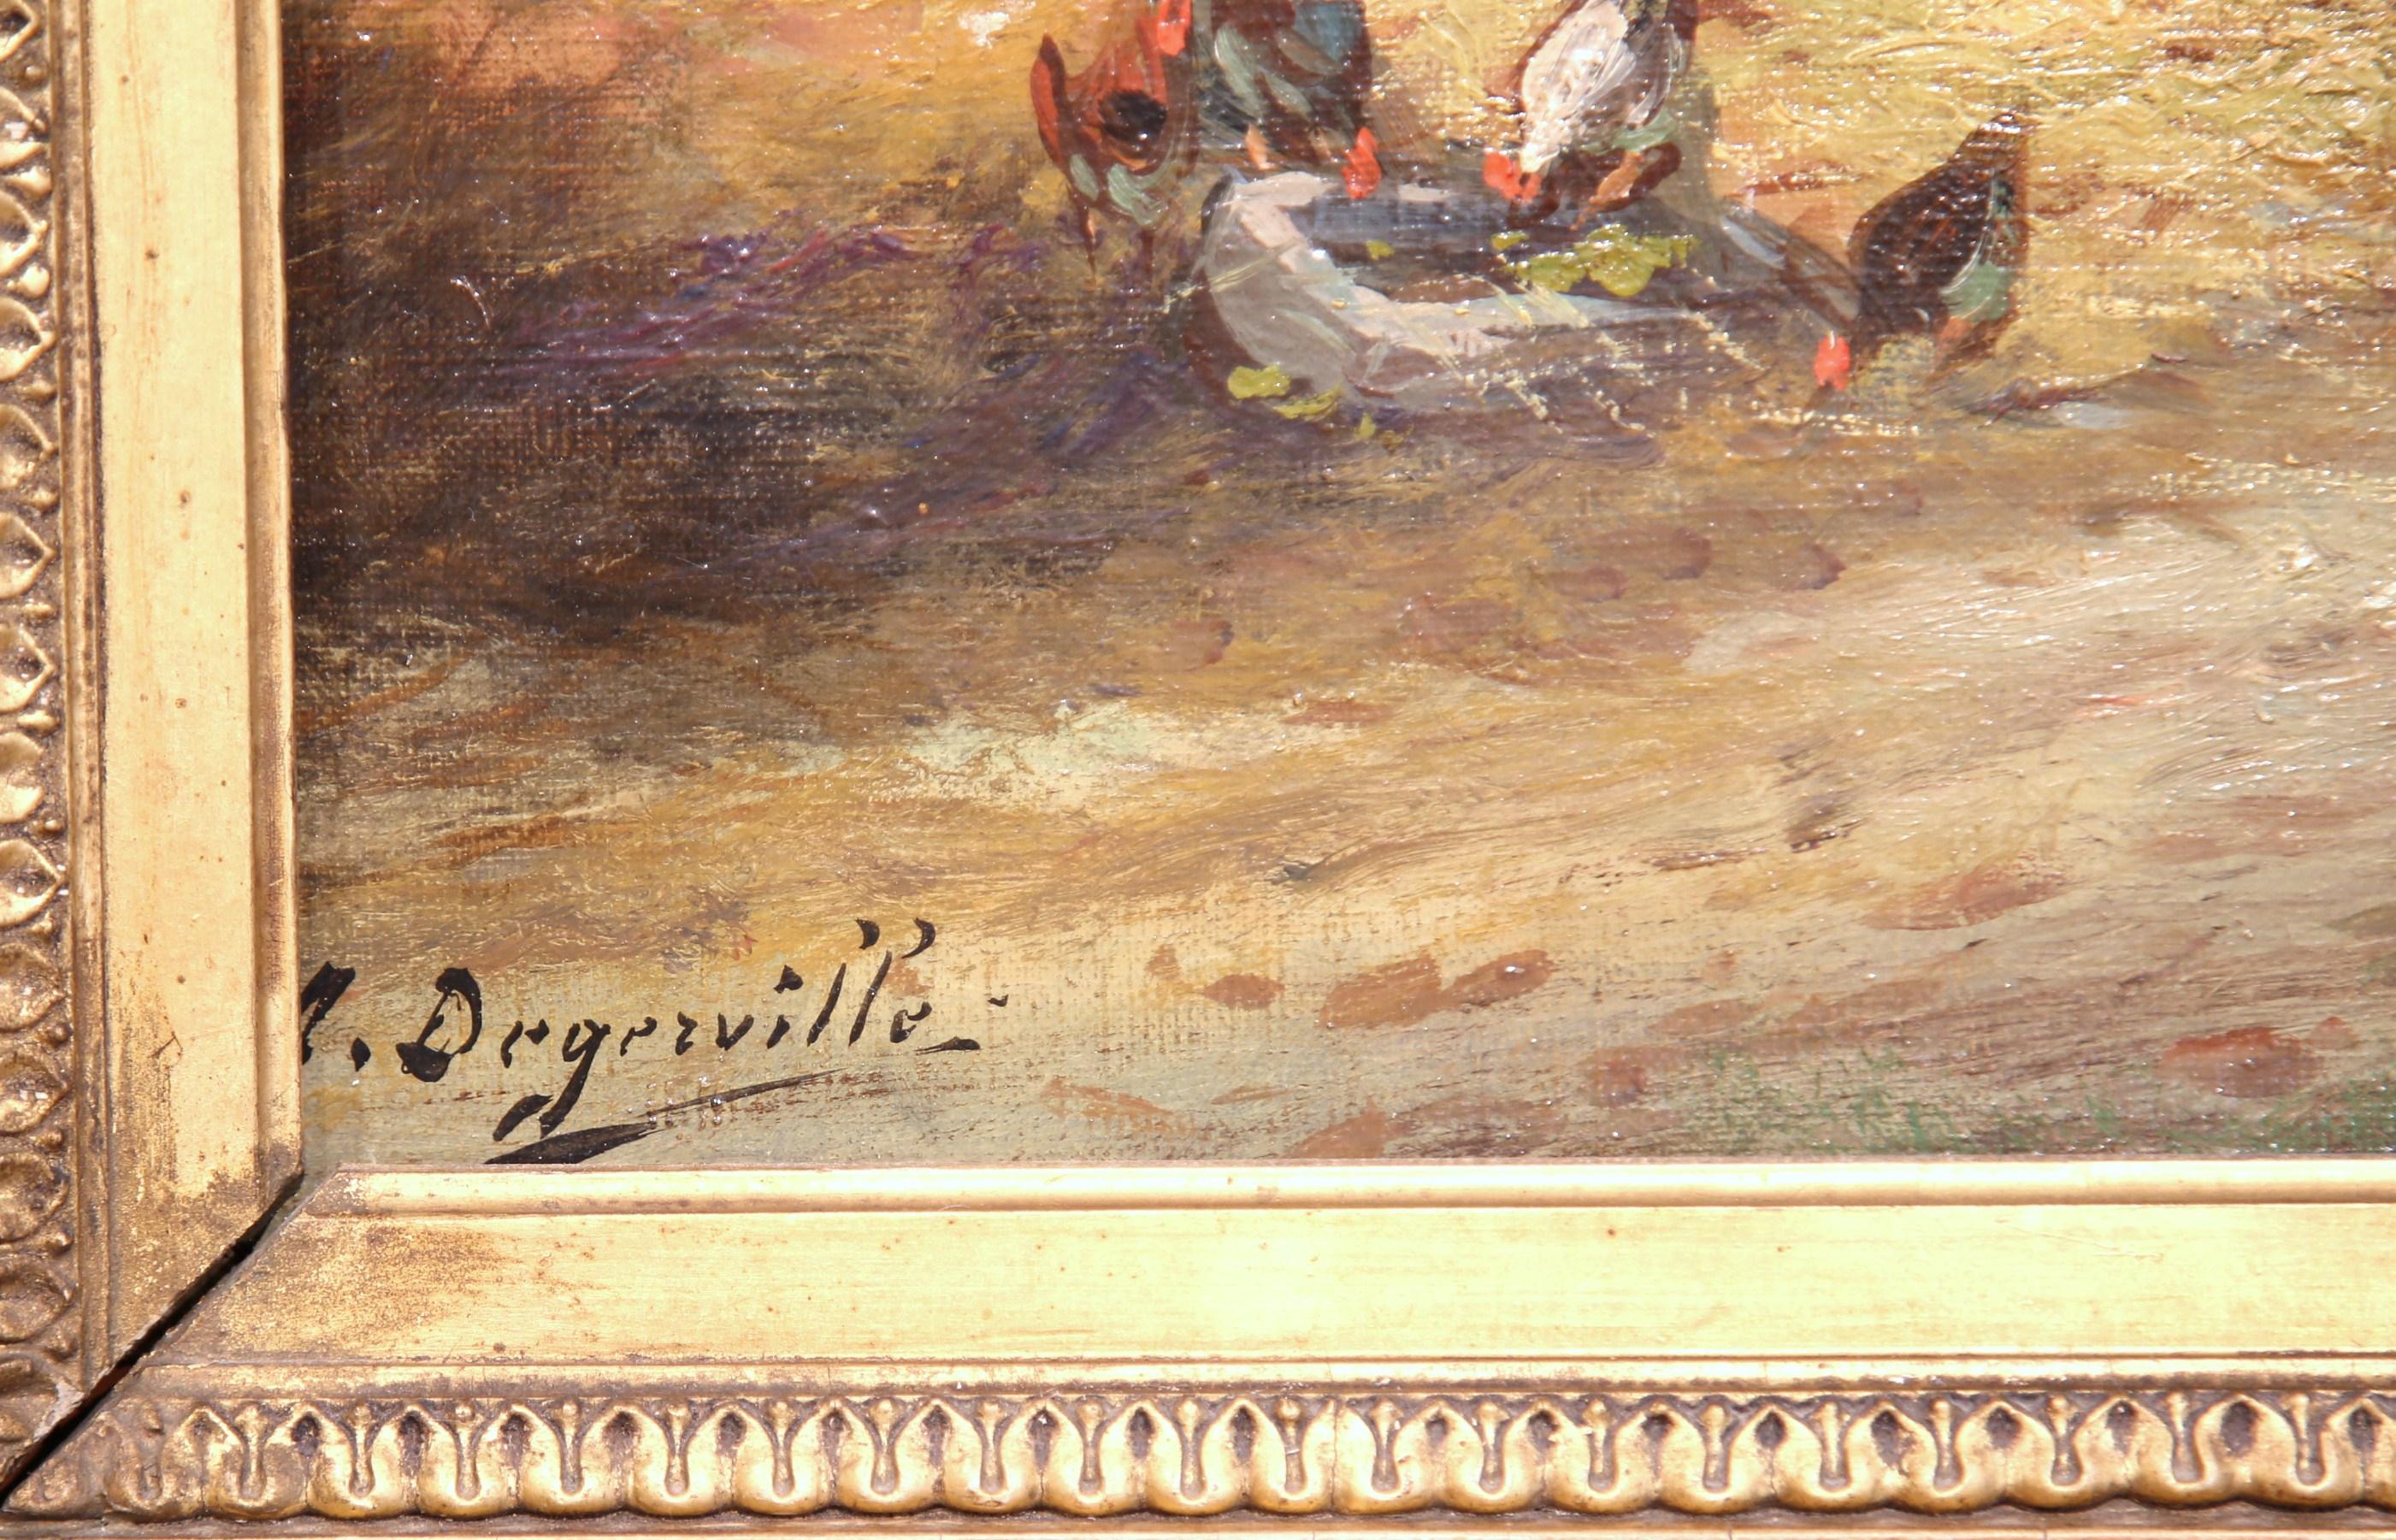 19th Century French Country Scene Oil Painting in Gilt Frame Signed A Degerville In Excellent Condition For Sale In Dallas, TX